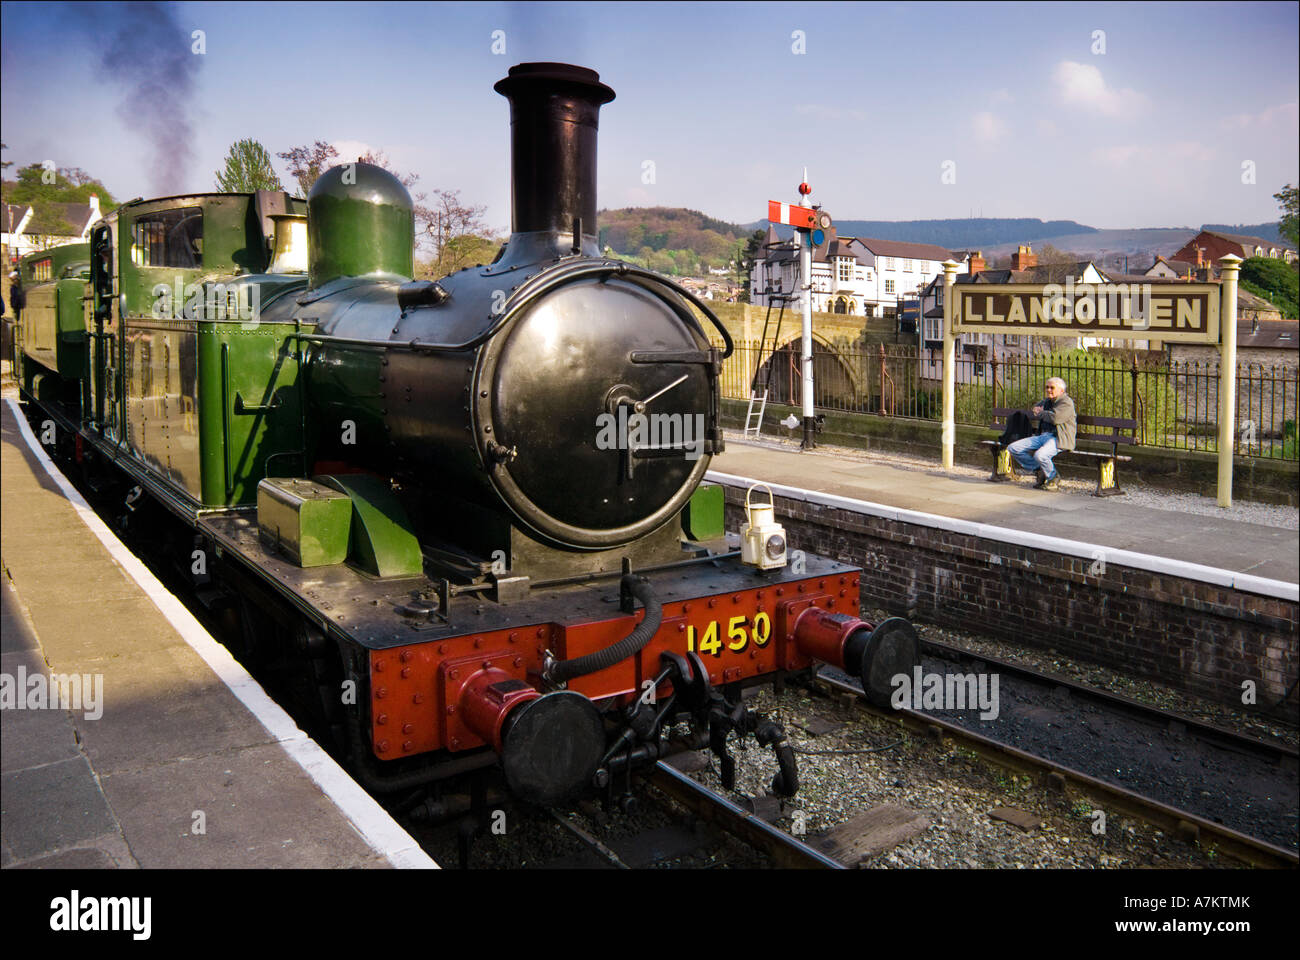 A steam tank engine waits at Llangollen station on the Llangollen heritage railway. Stock Photo